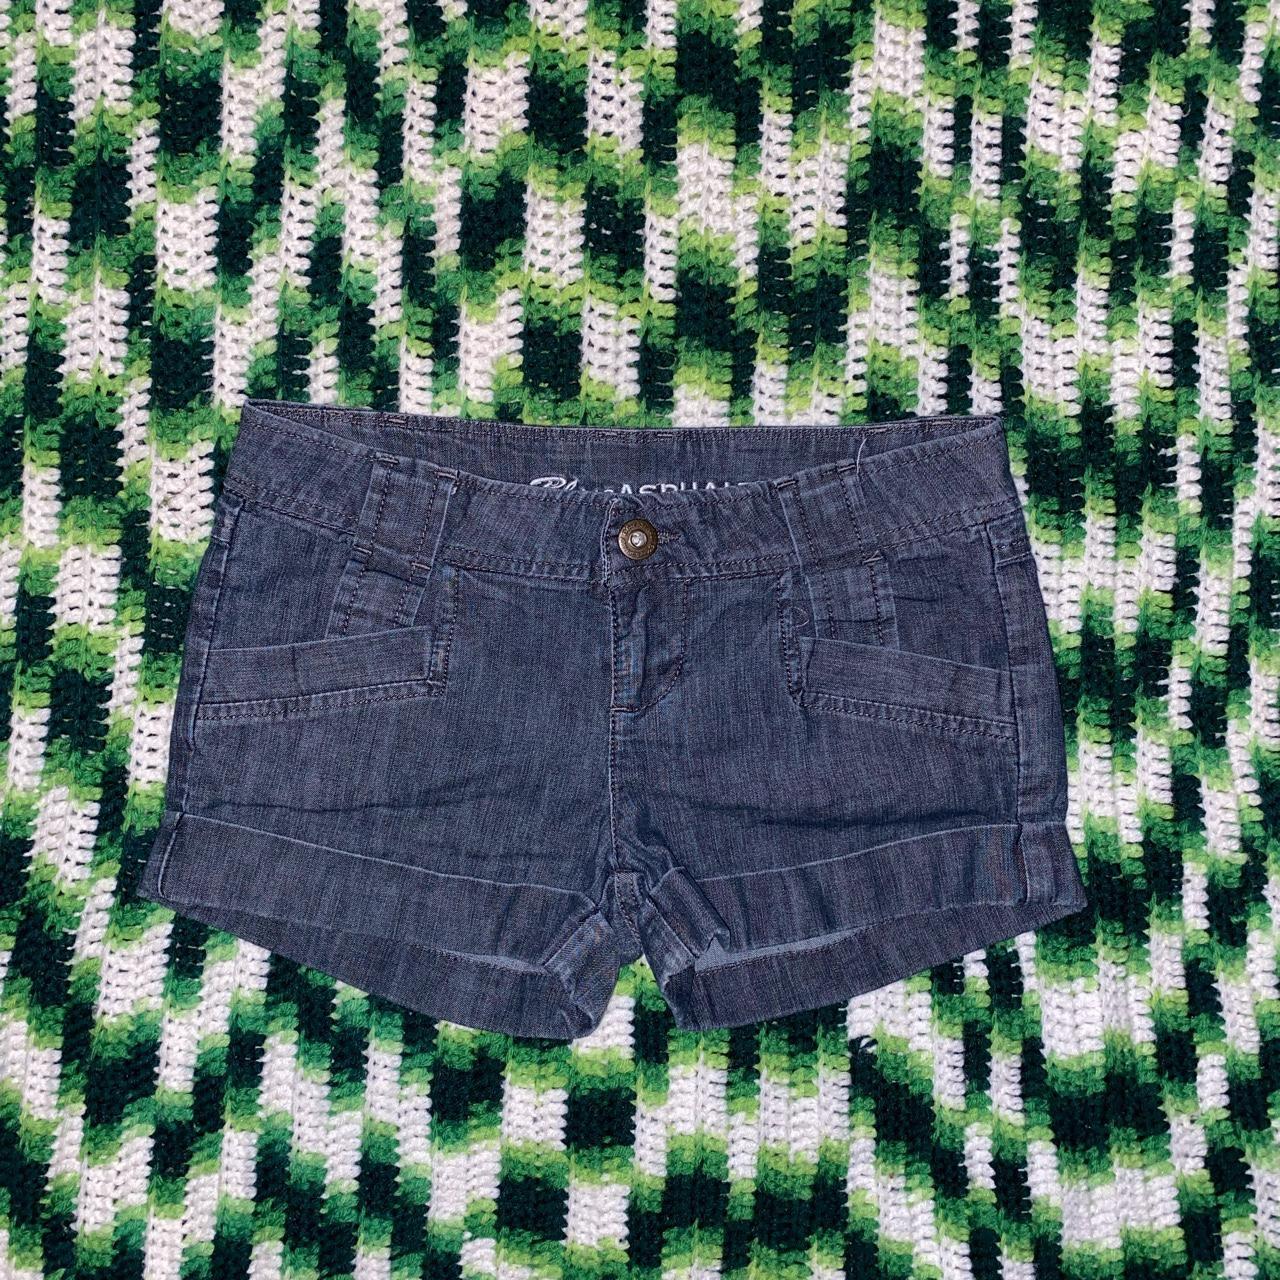 vintage low rise shorts -there’s no stains or... - Depop